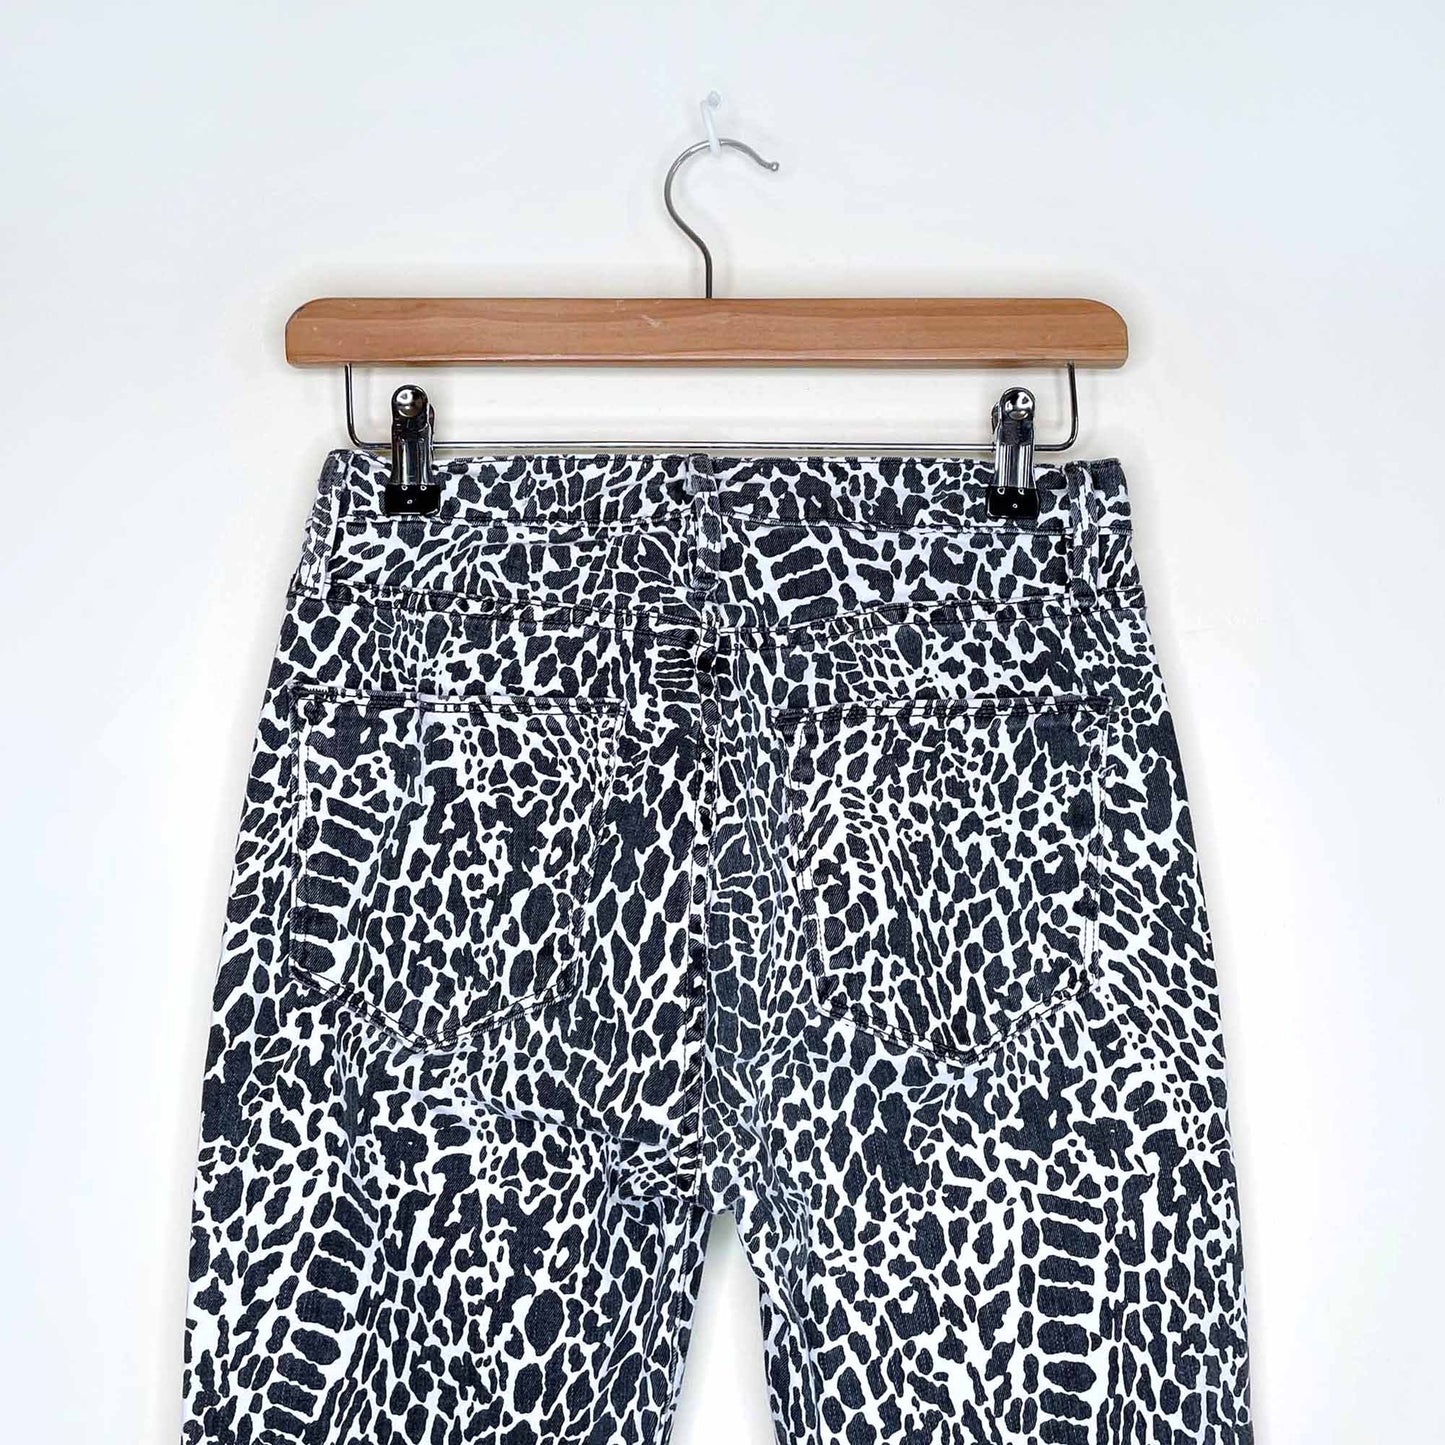 frame le high skinny black and white leopard printed jeans - size 27